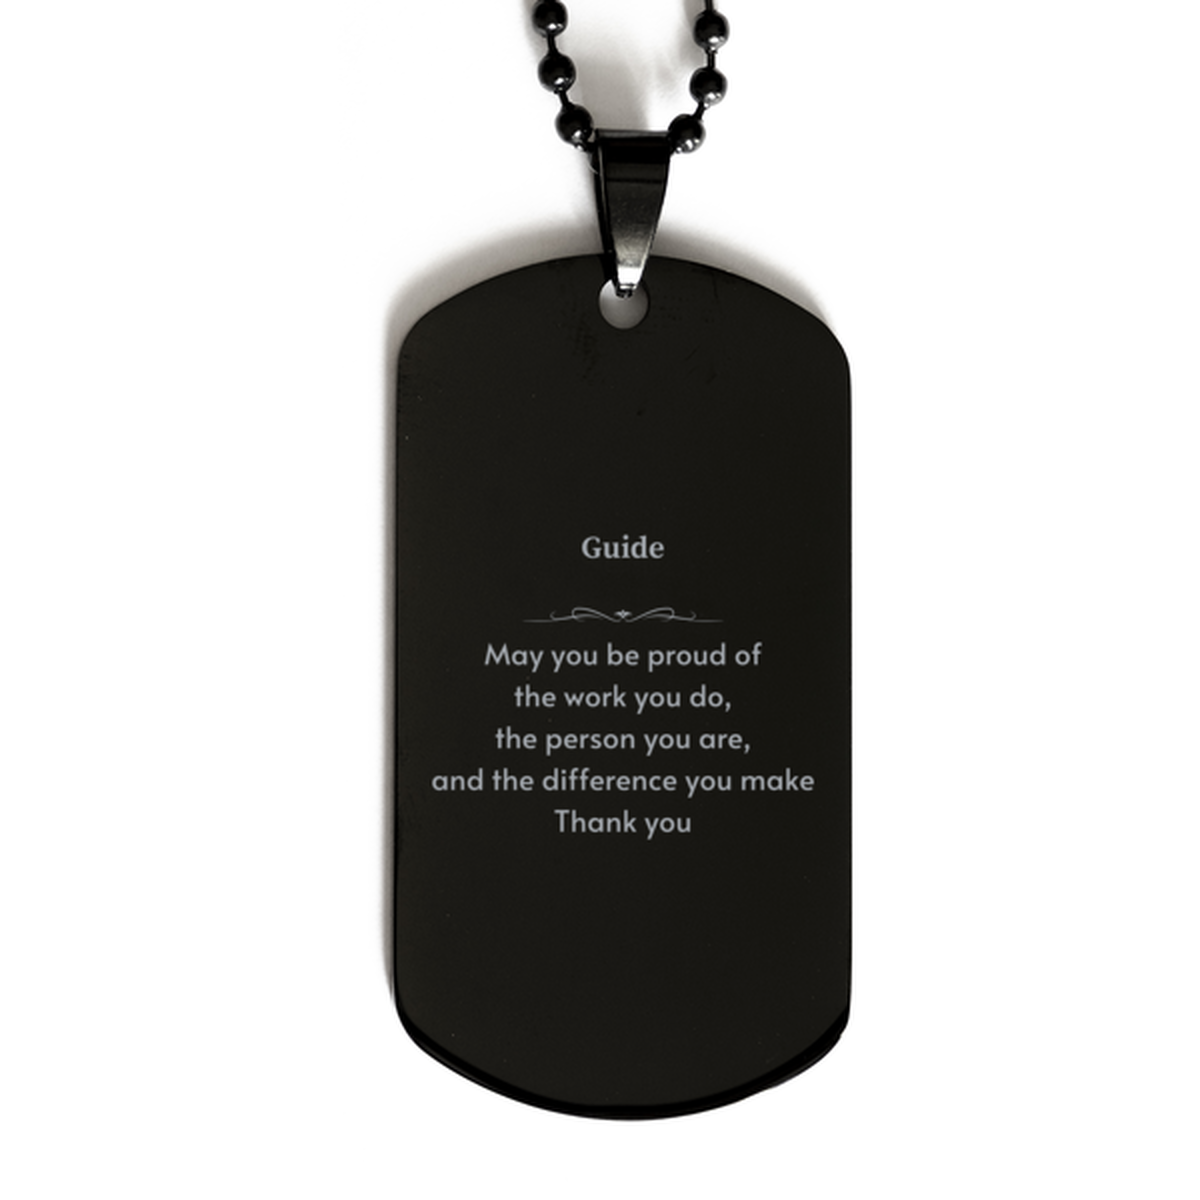 Heartwarming Black Dog Tag Retirement Coworkers Gifts for Guide, Guide May You be proud of the work you do, the person you are Gifts for Boss Men Women Friends